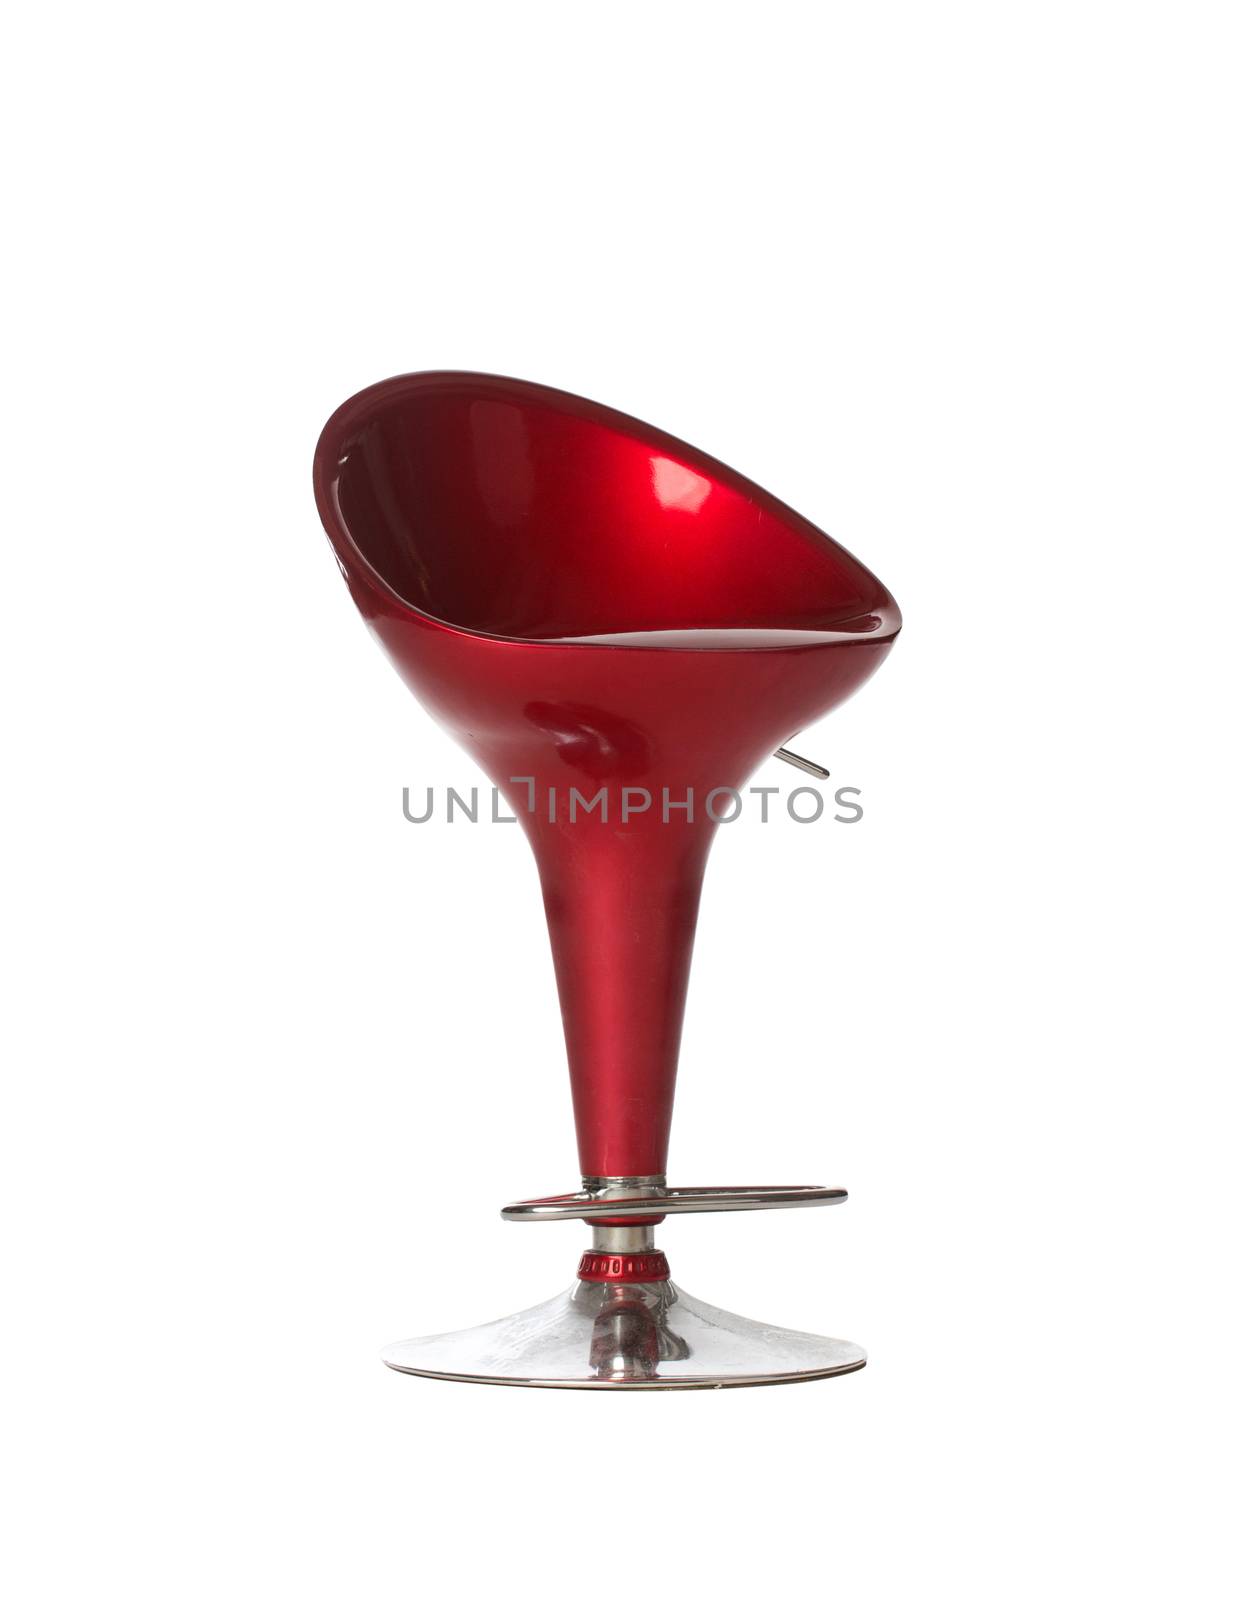 Modern chair in metal on white background by gsdonlin